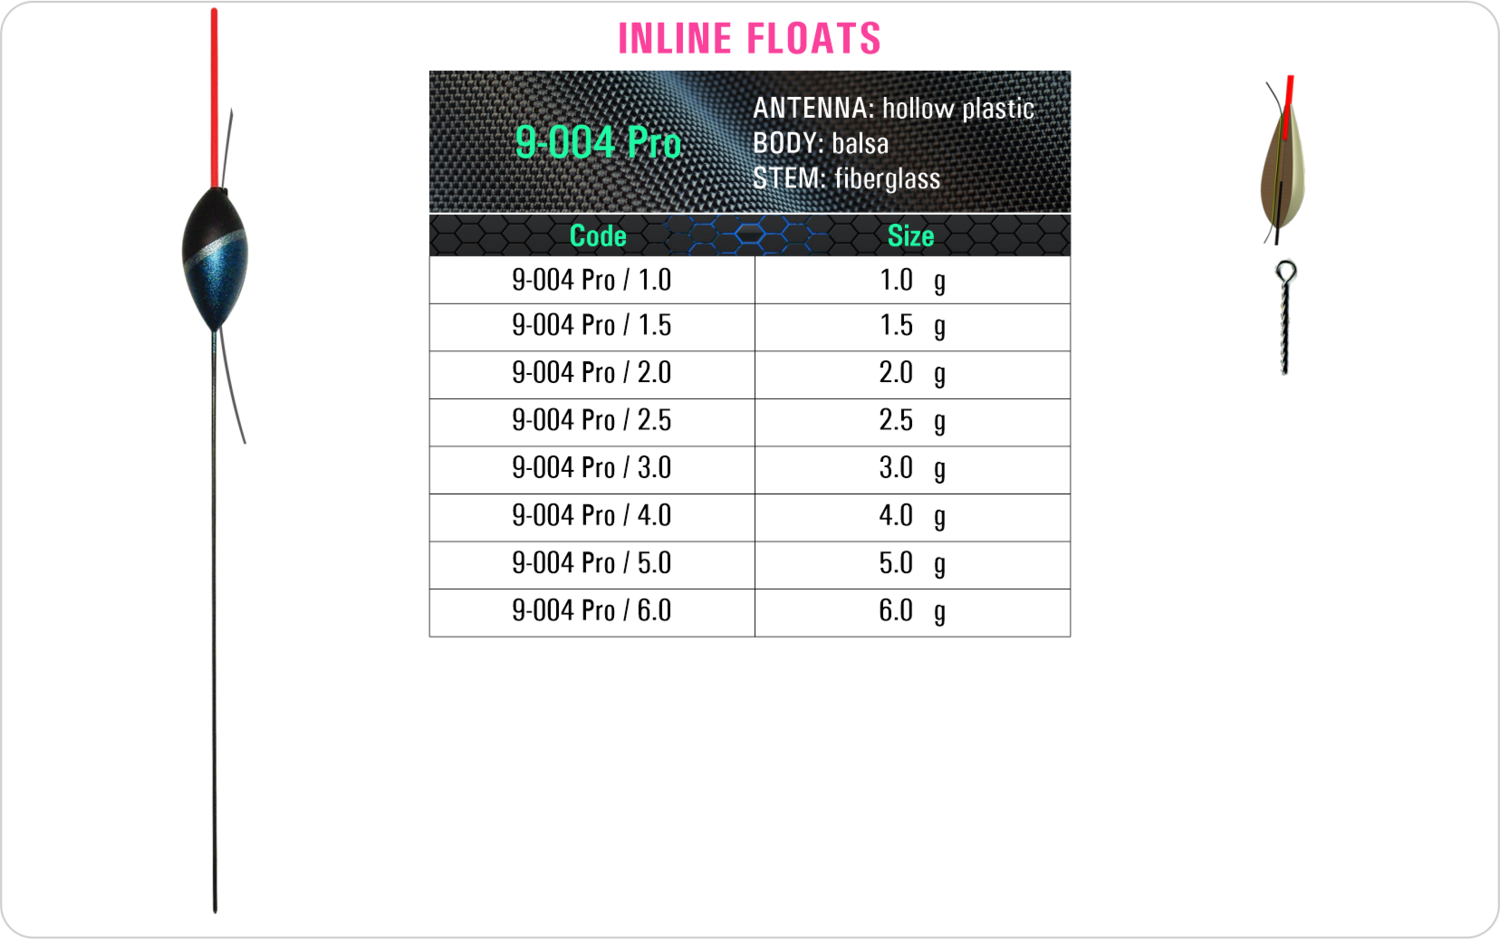 SF 9-004 Pro - Lake and river float model and table containing an additional information about this float with different codes, sizes, types of the body, the stem and the antenna of the float.